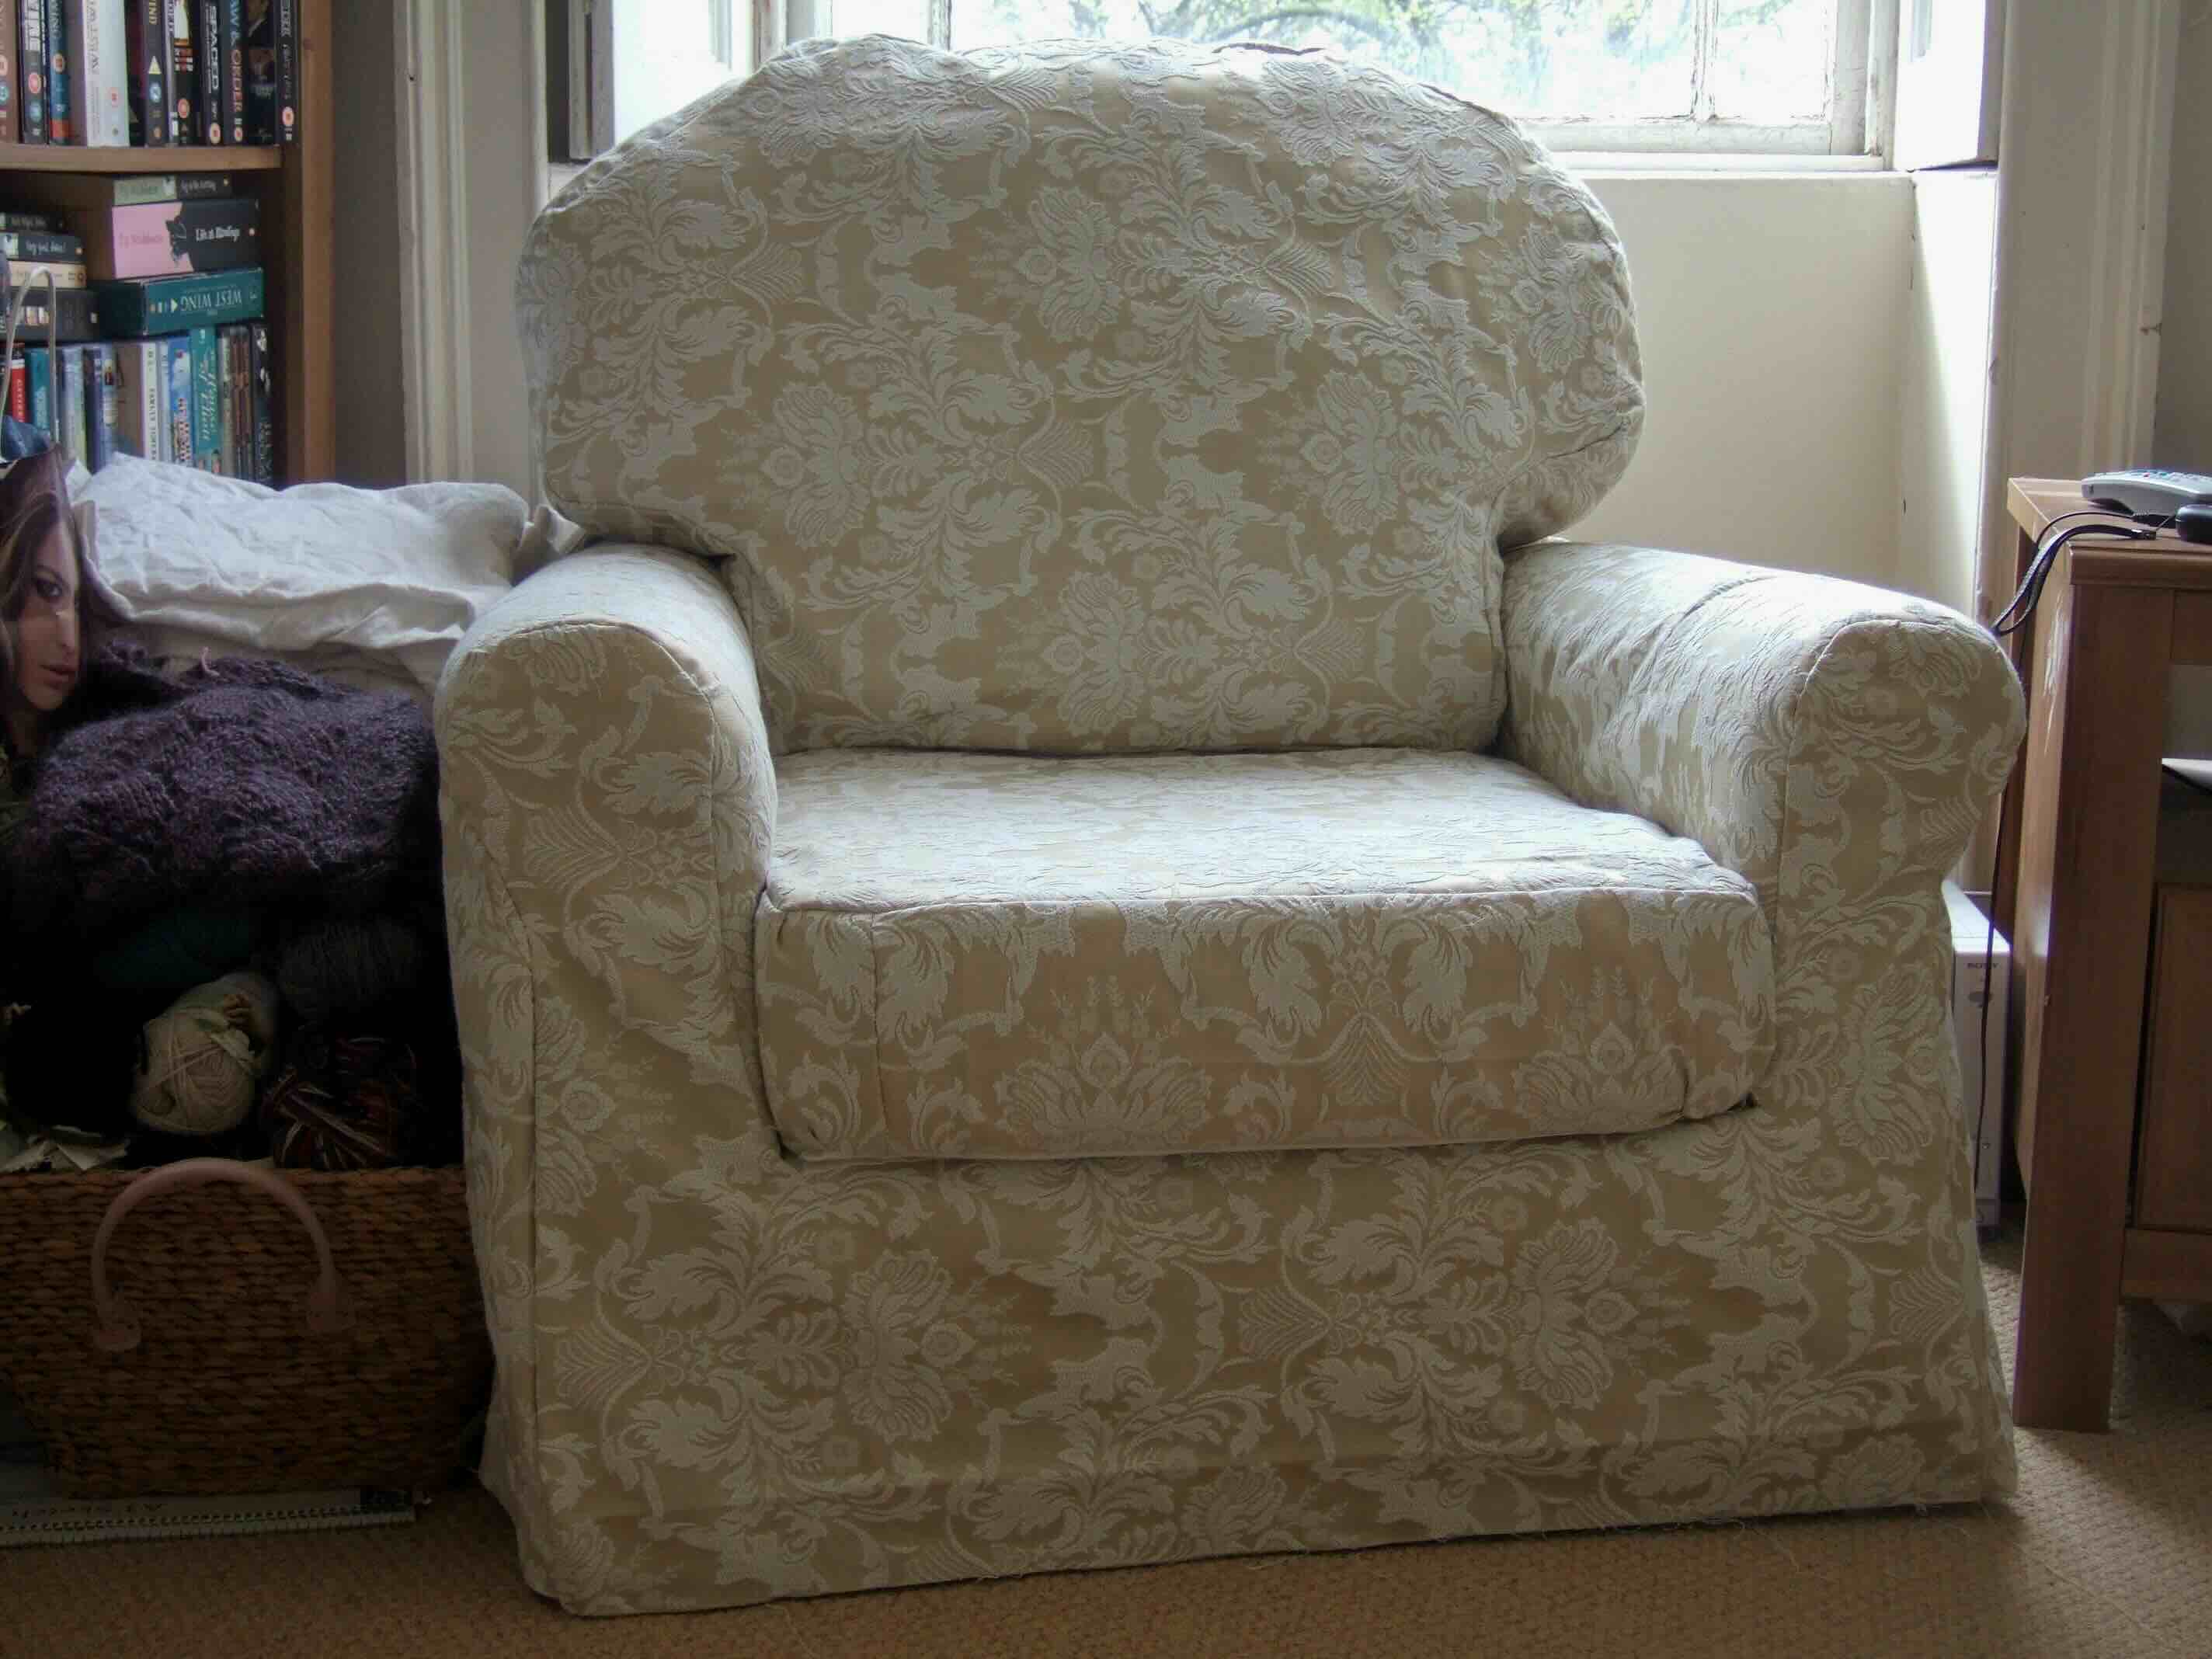 How To Make Armchair Slipcovers